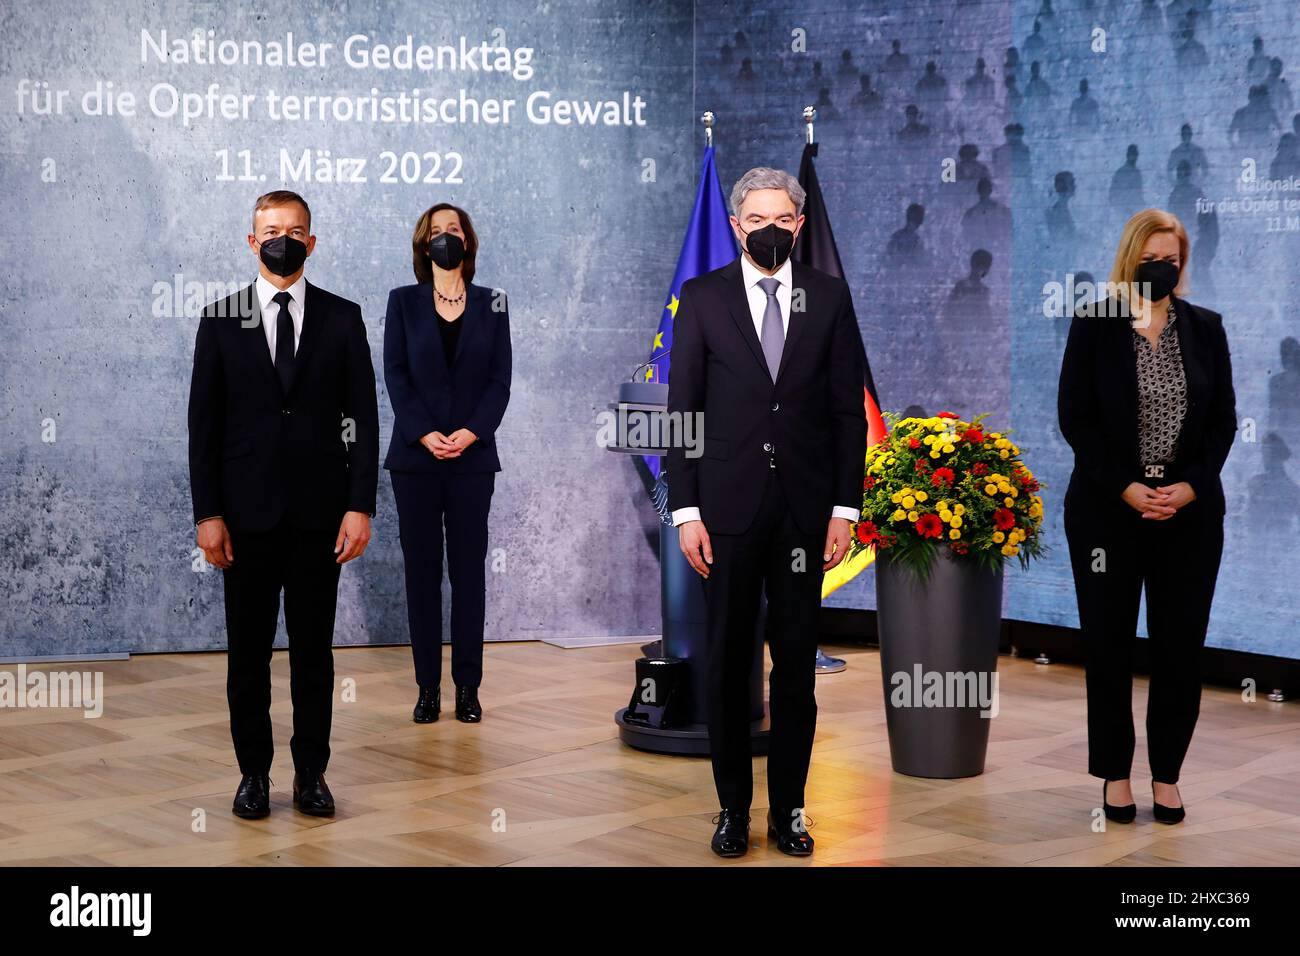 11 March 2022, Berlin: Pascal Kober (l-r), Federal Government Commissioner for the Concerns of Victims of Terrorist and Extremist Attacks in Germany, Petra Terhoeven, historian, Stephan Harbarth, President of the Federal Constitutional Court, and Nancy Faeser (SPD), Federal Minister of the Interior and Home Affairs, stand during the minute's silence at the German government's commemoration of the victims of terrorist violence. The Day of Remembrance, which is to be held annually on March 11, ties in at the national level with the European Day of Remembrance, which was established after the Mad Stock Photo